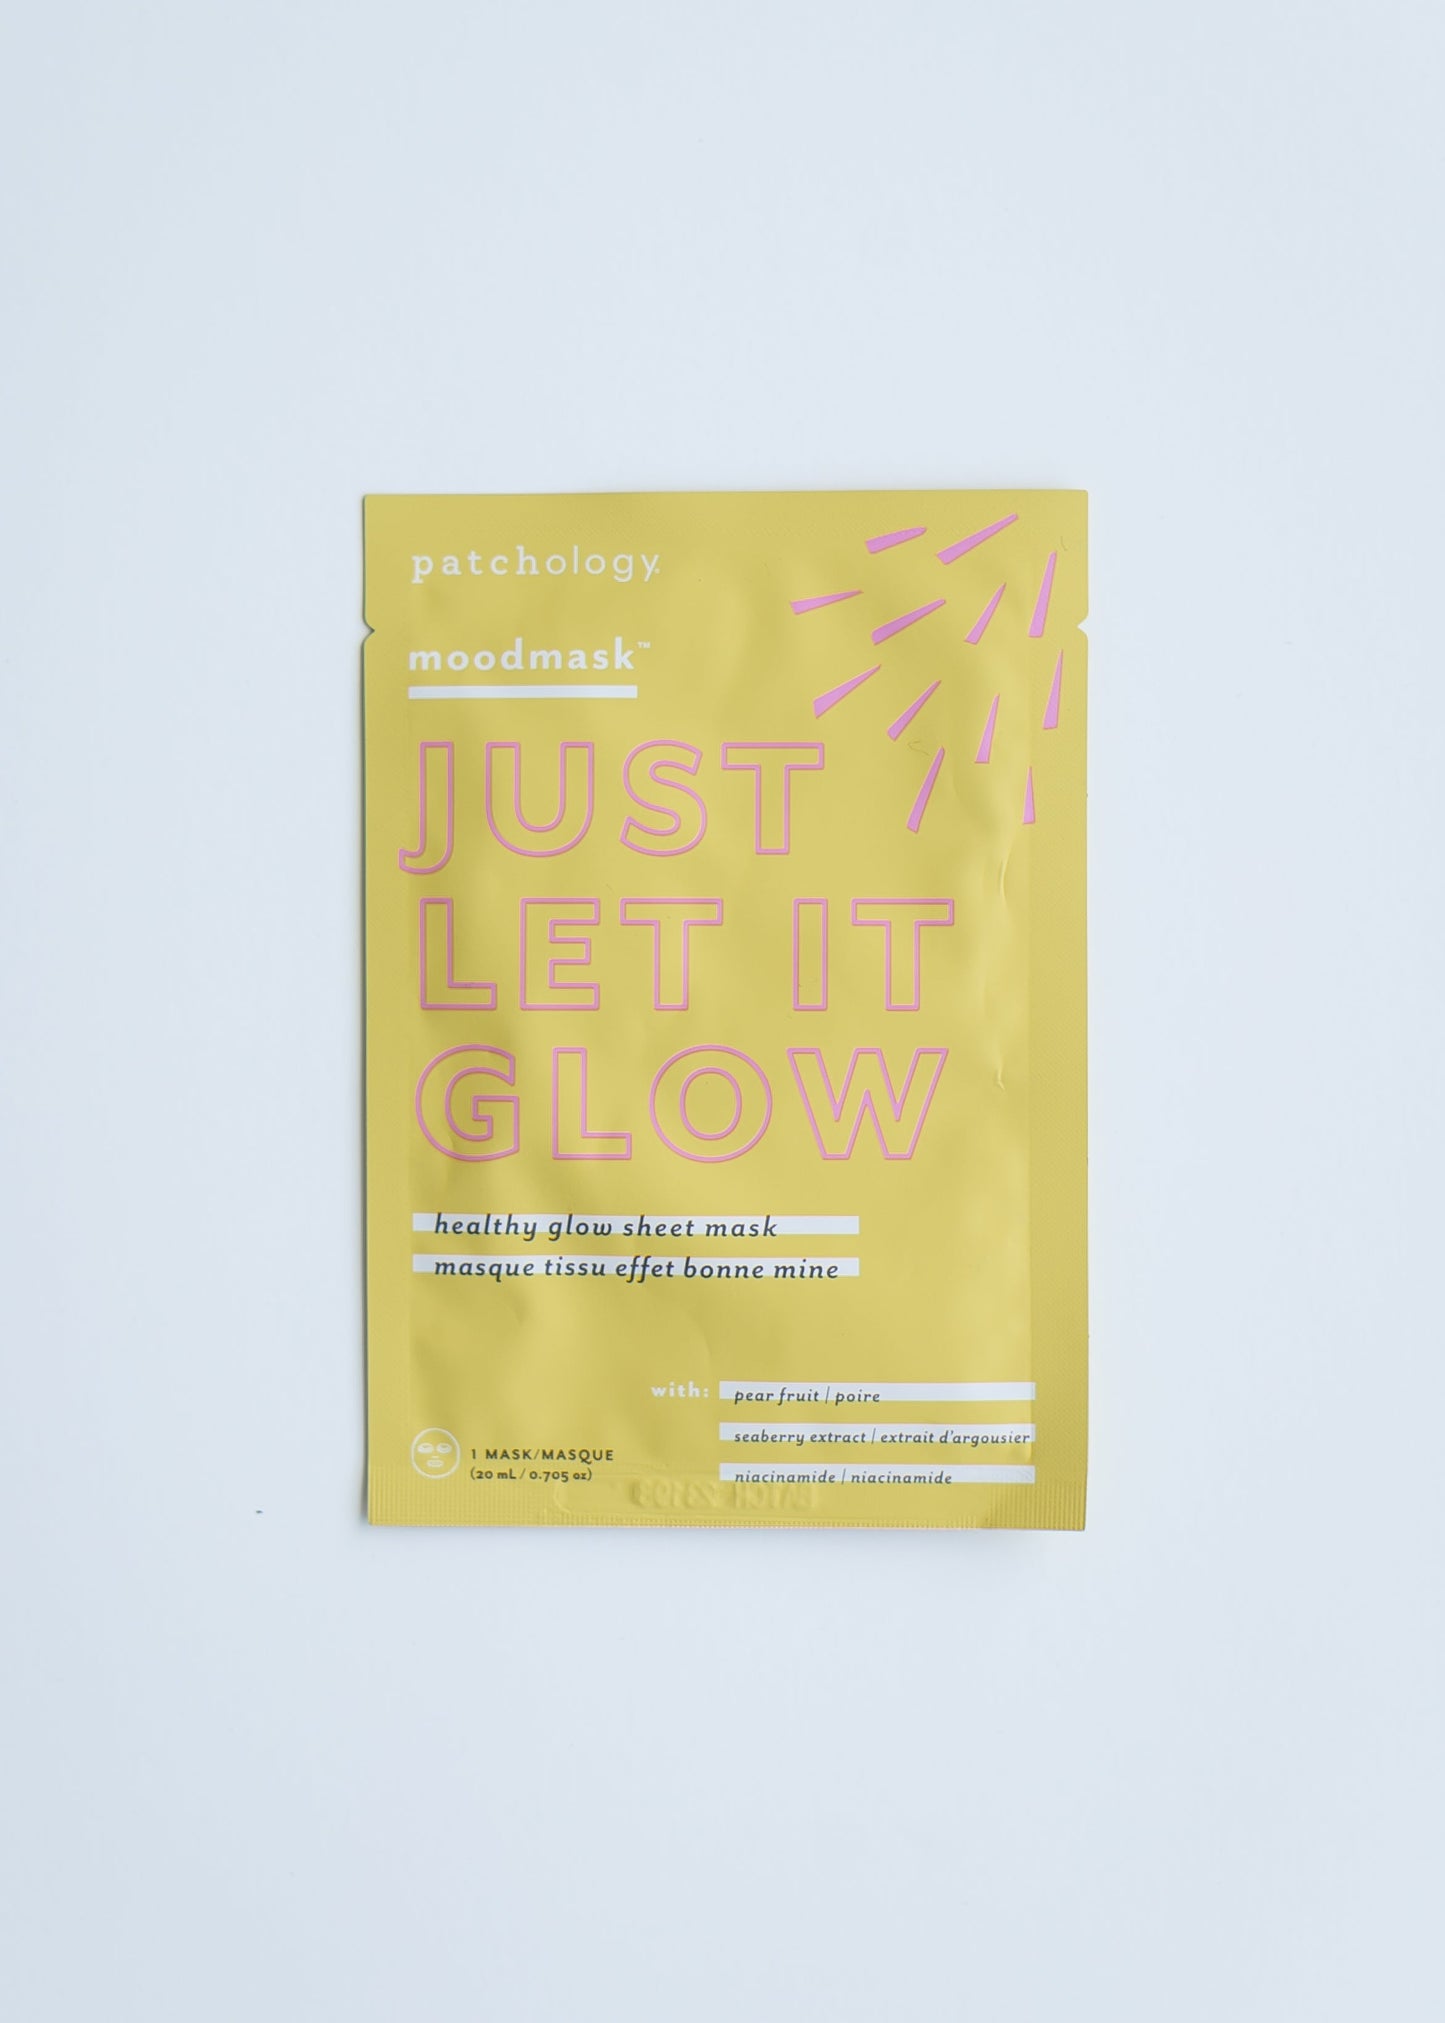 Patchology Moodmask Just Let it Glow Sheet Face Mask Gifts